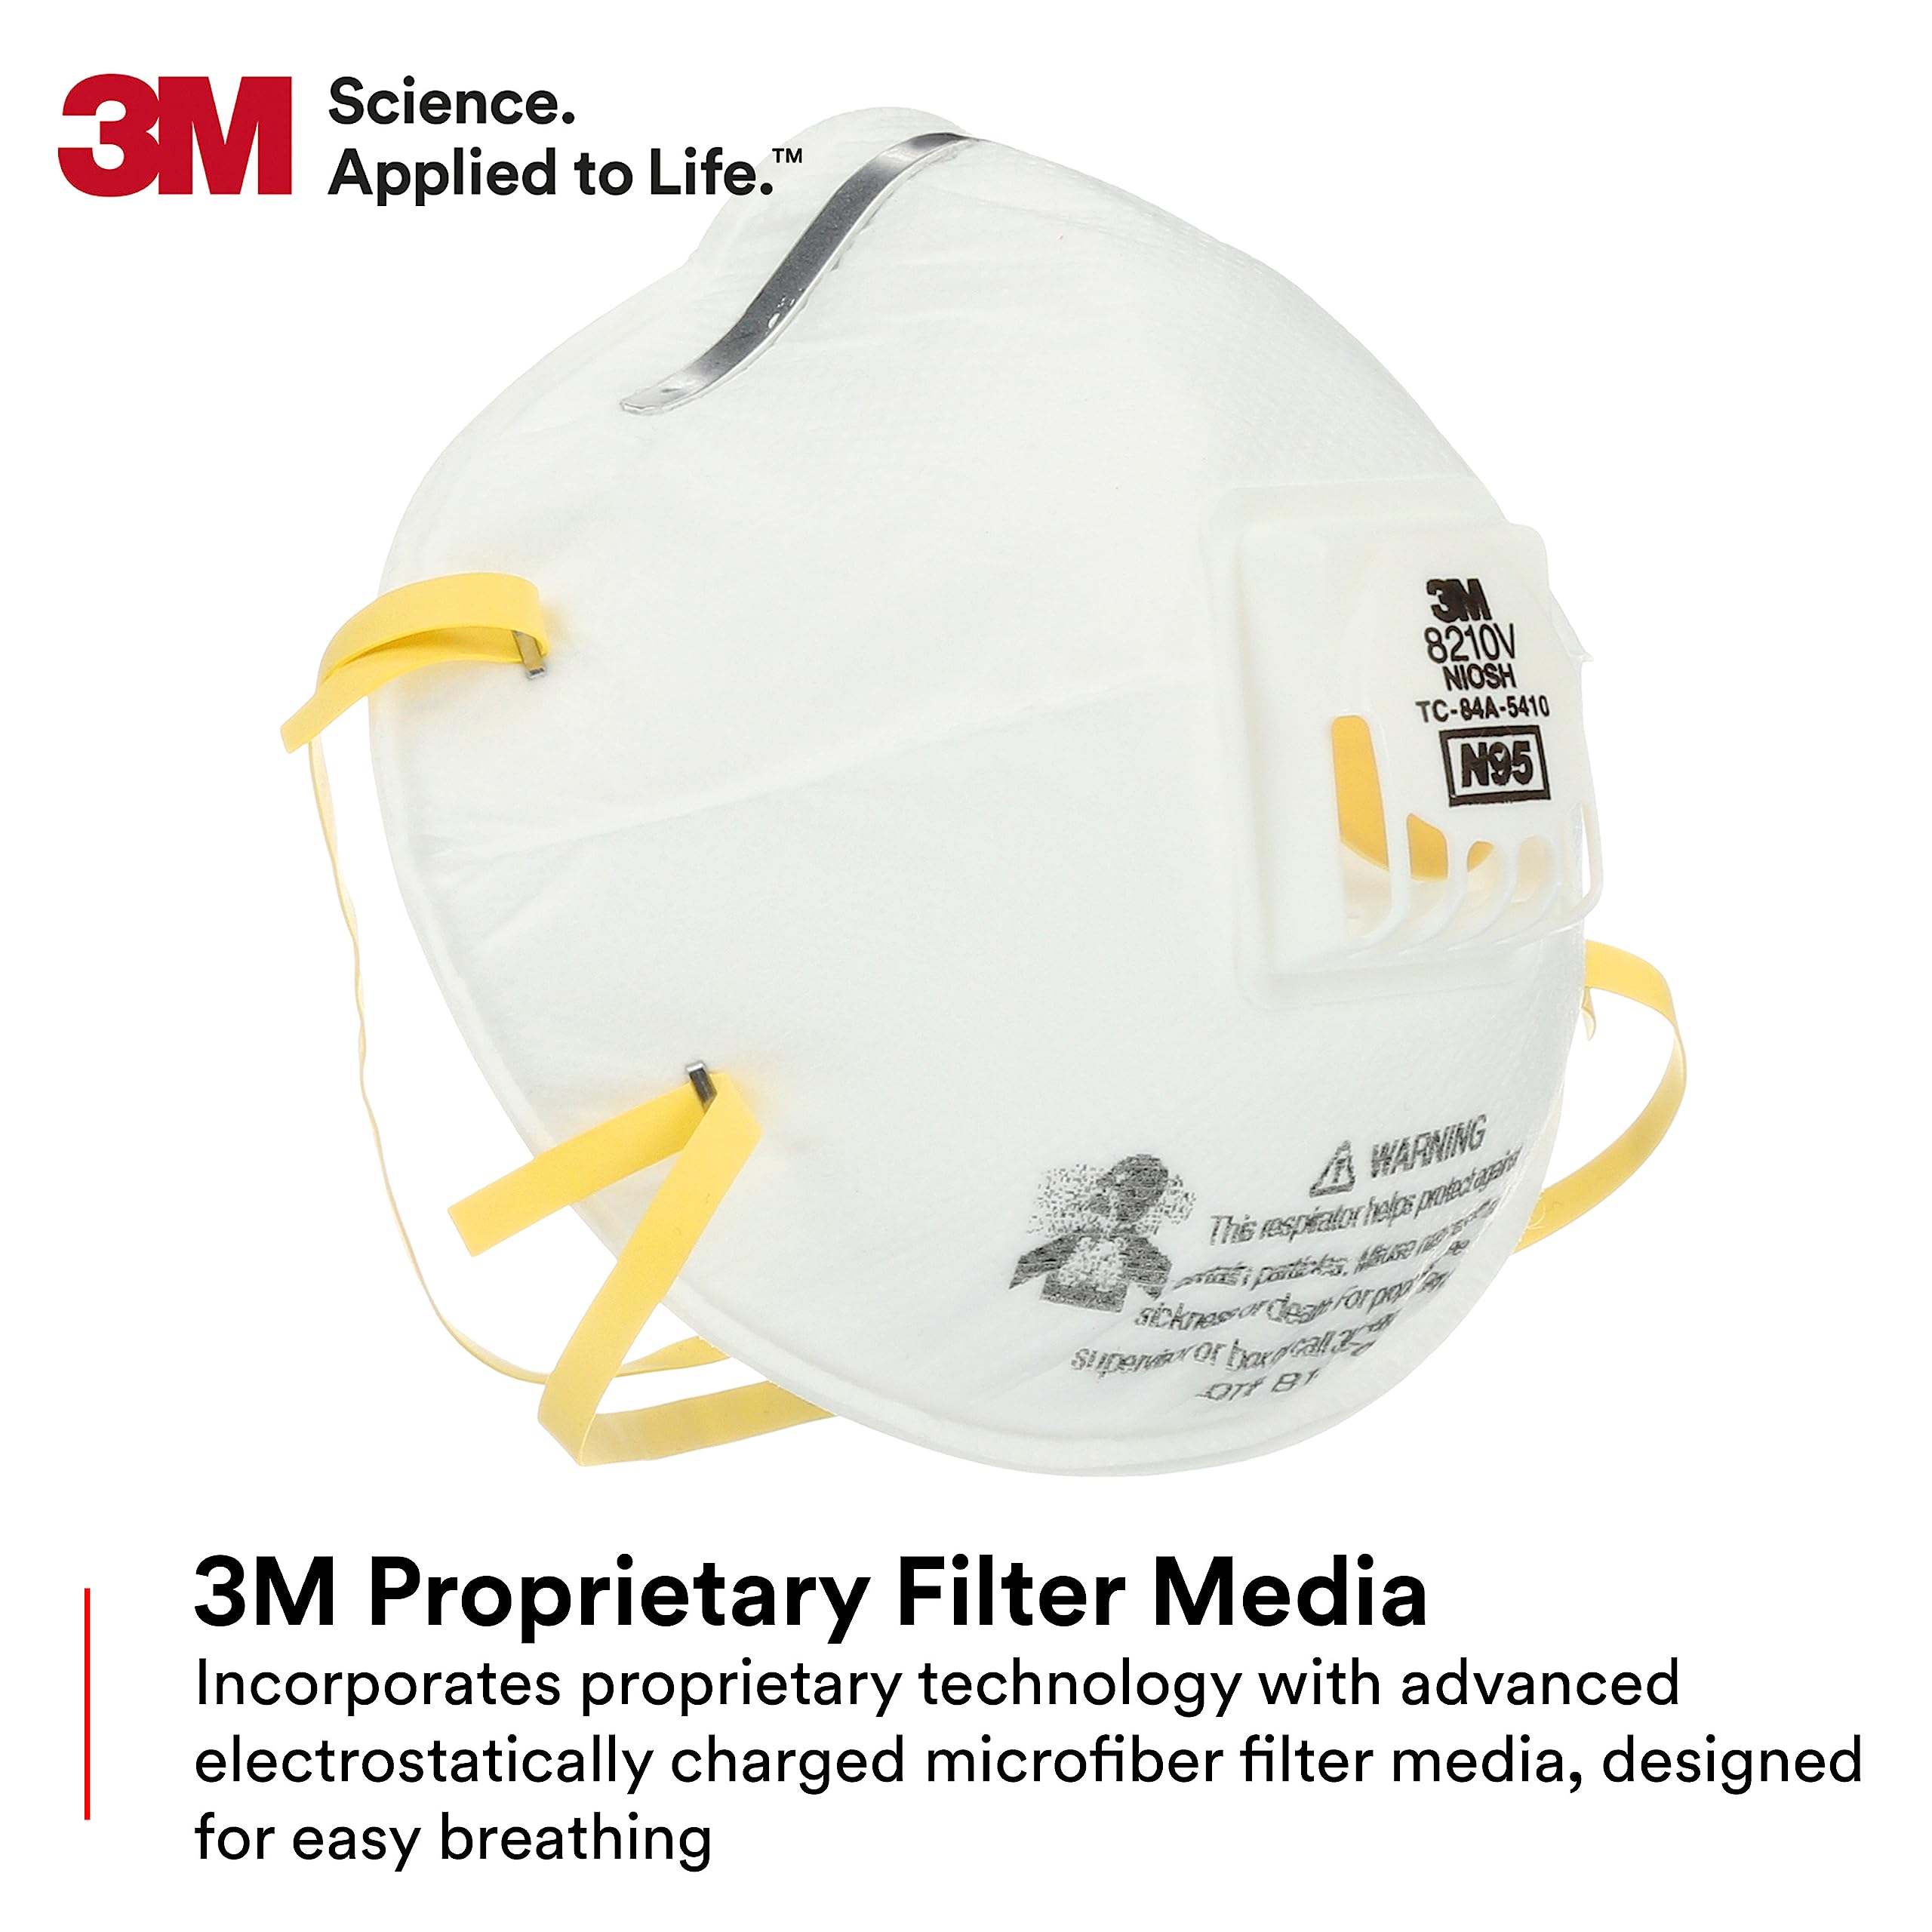 3M Particulate Respirator 8210V with Cool Flow Valve, Smoke, Grinding, Sanding, Sawing, Sweeping, Woodworking, Dust, 80/Pack